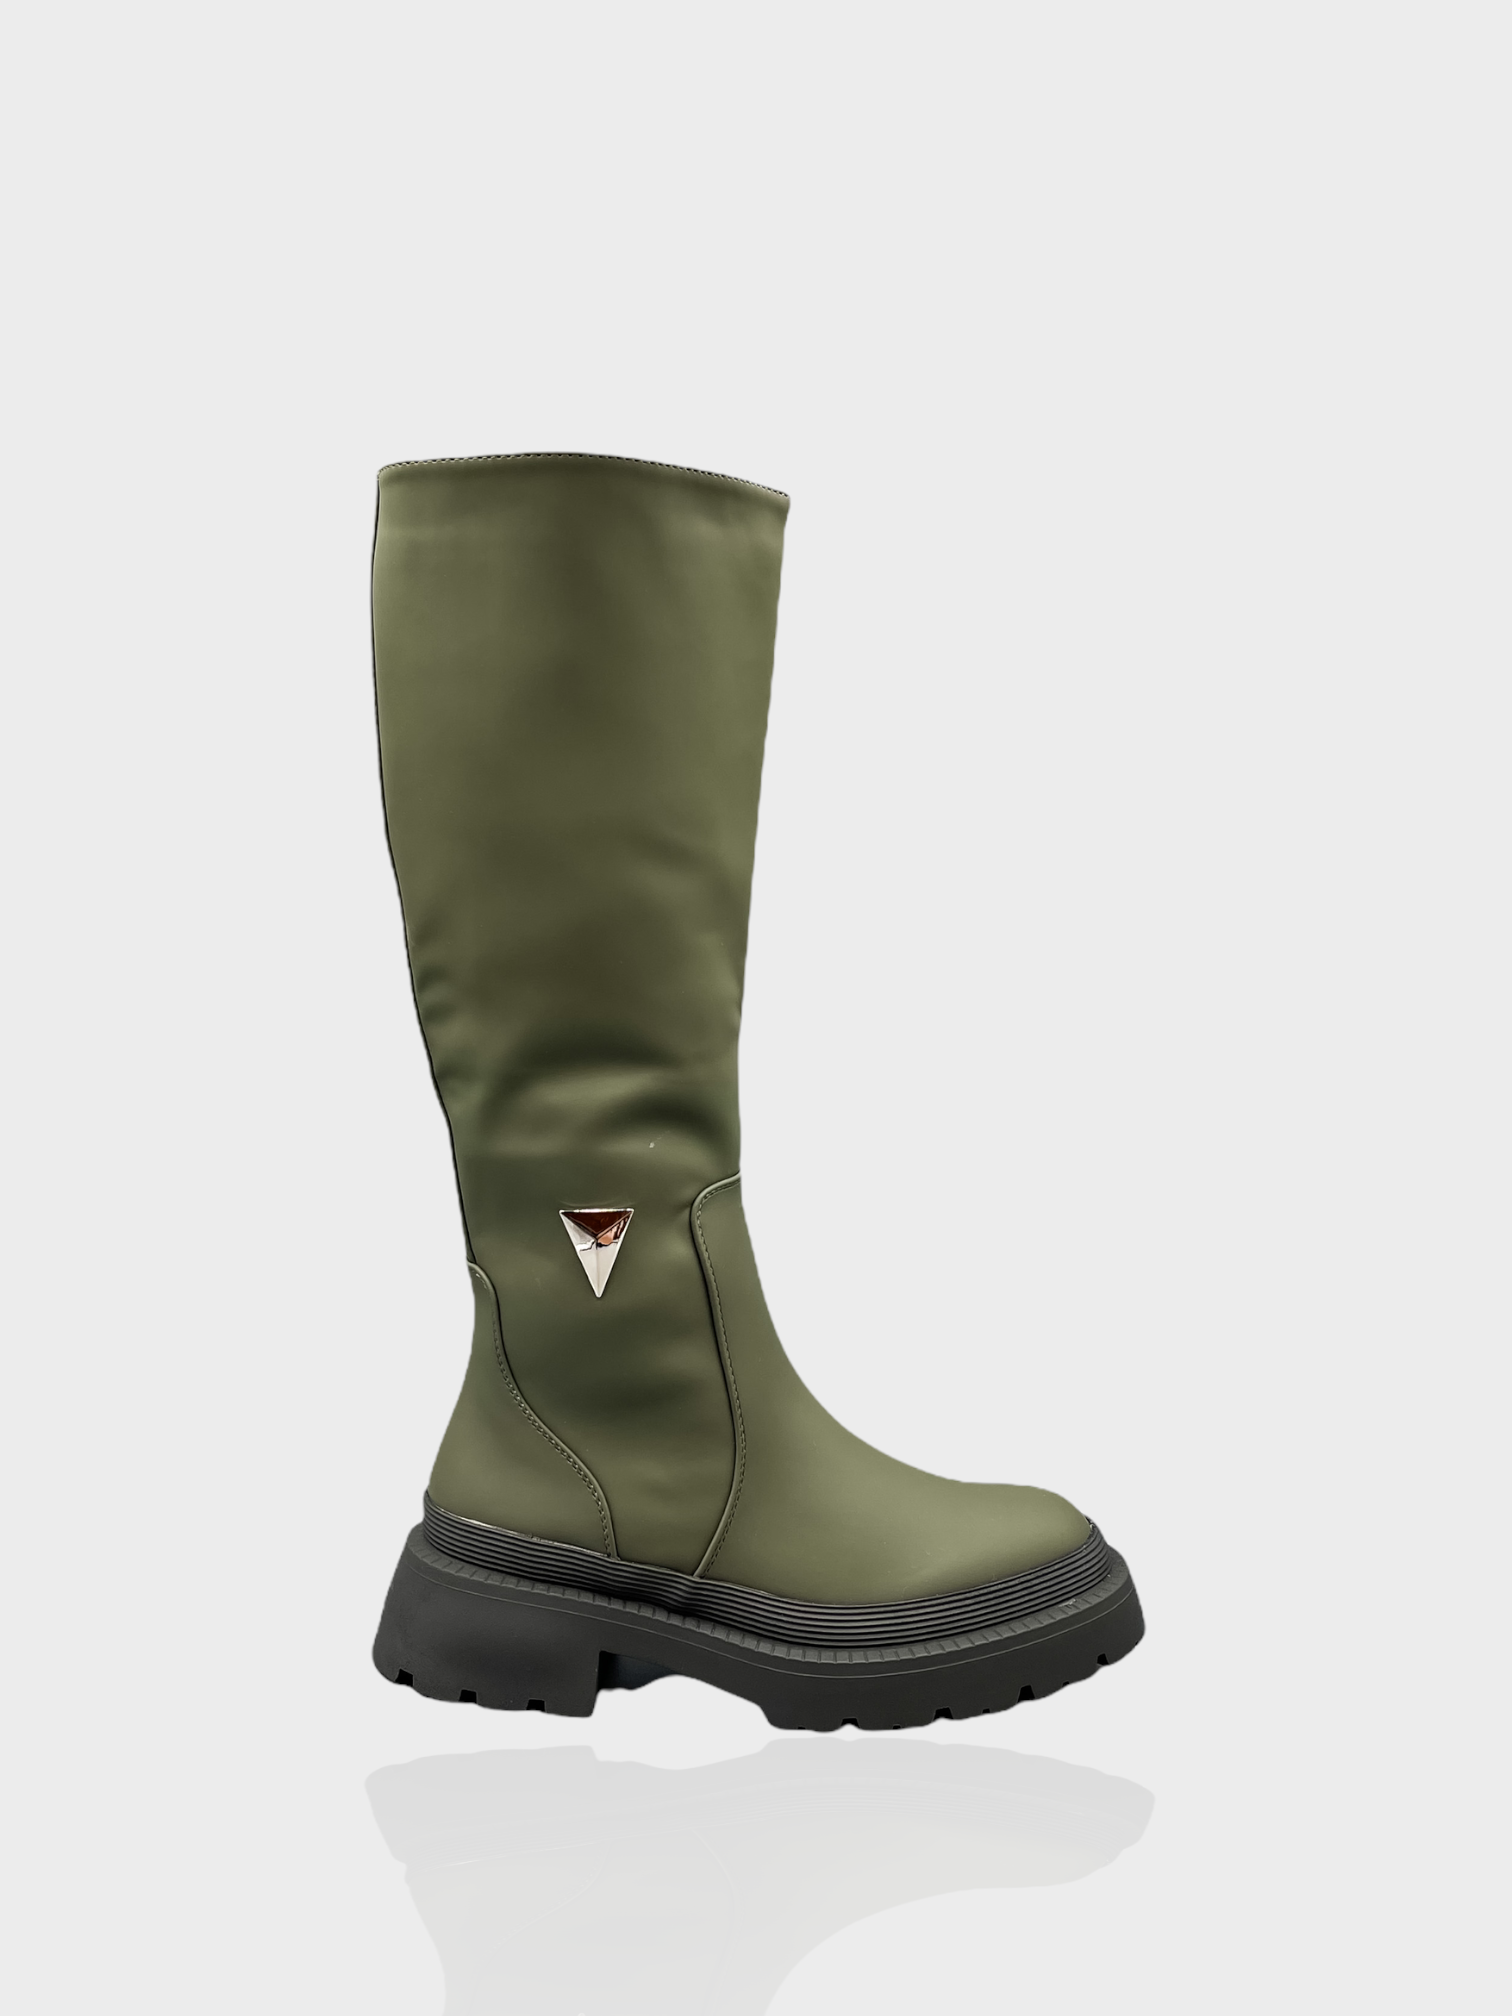 Wellington boots with pyramid